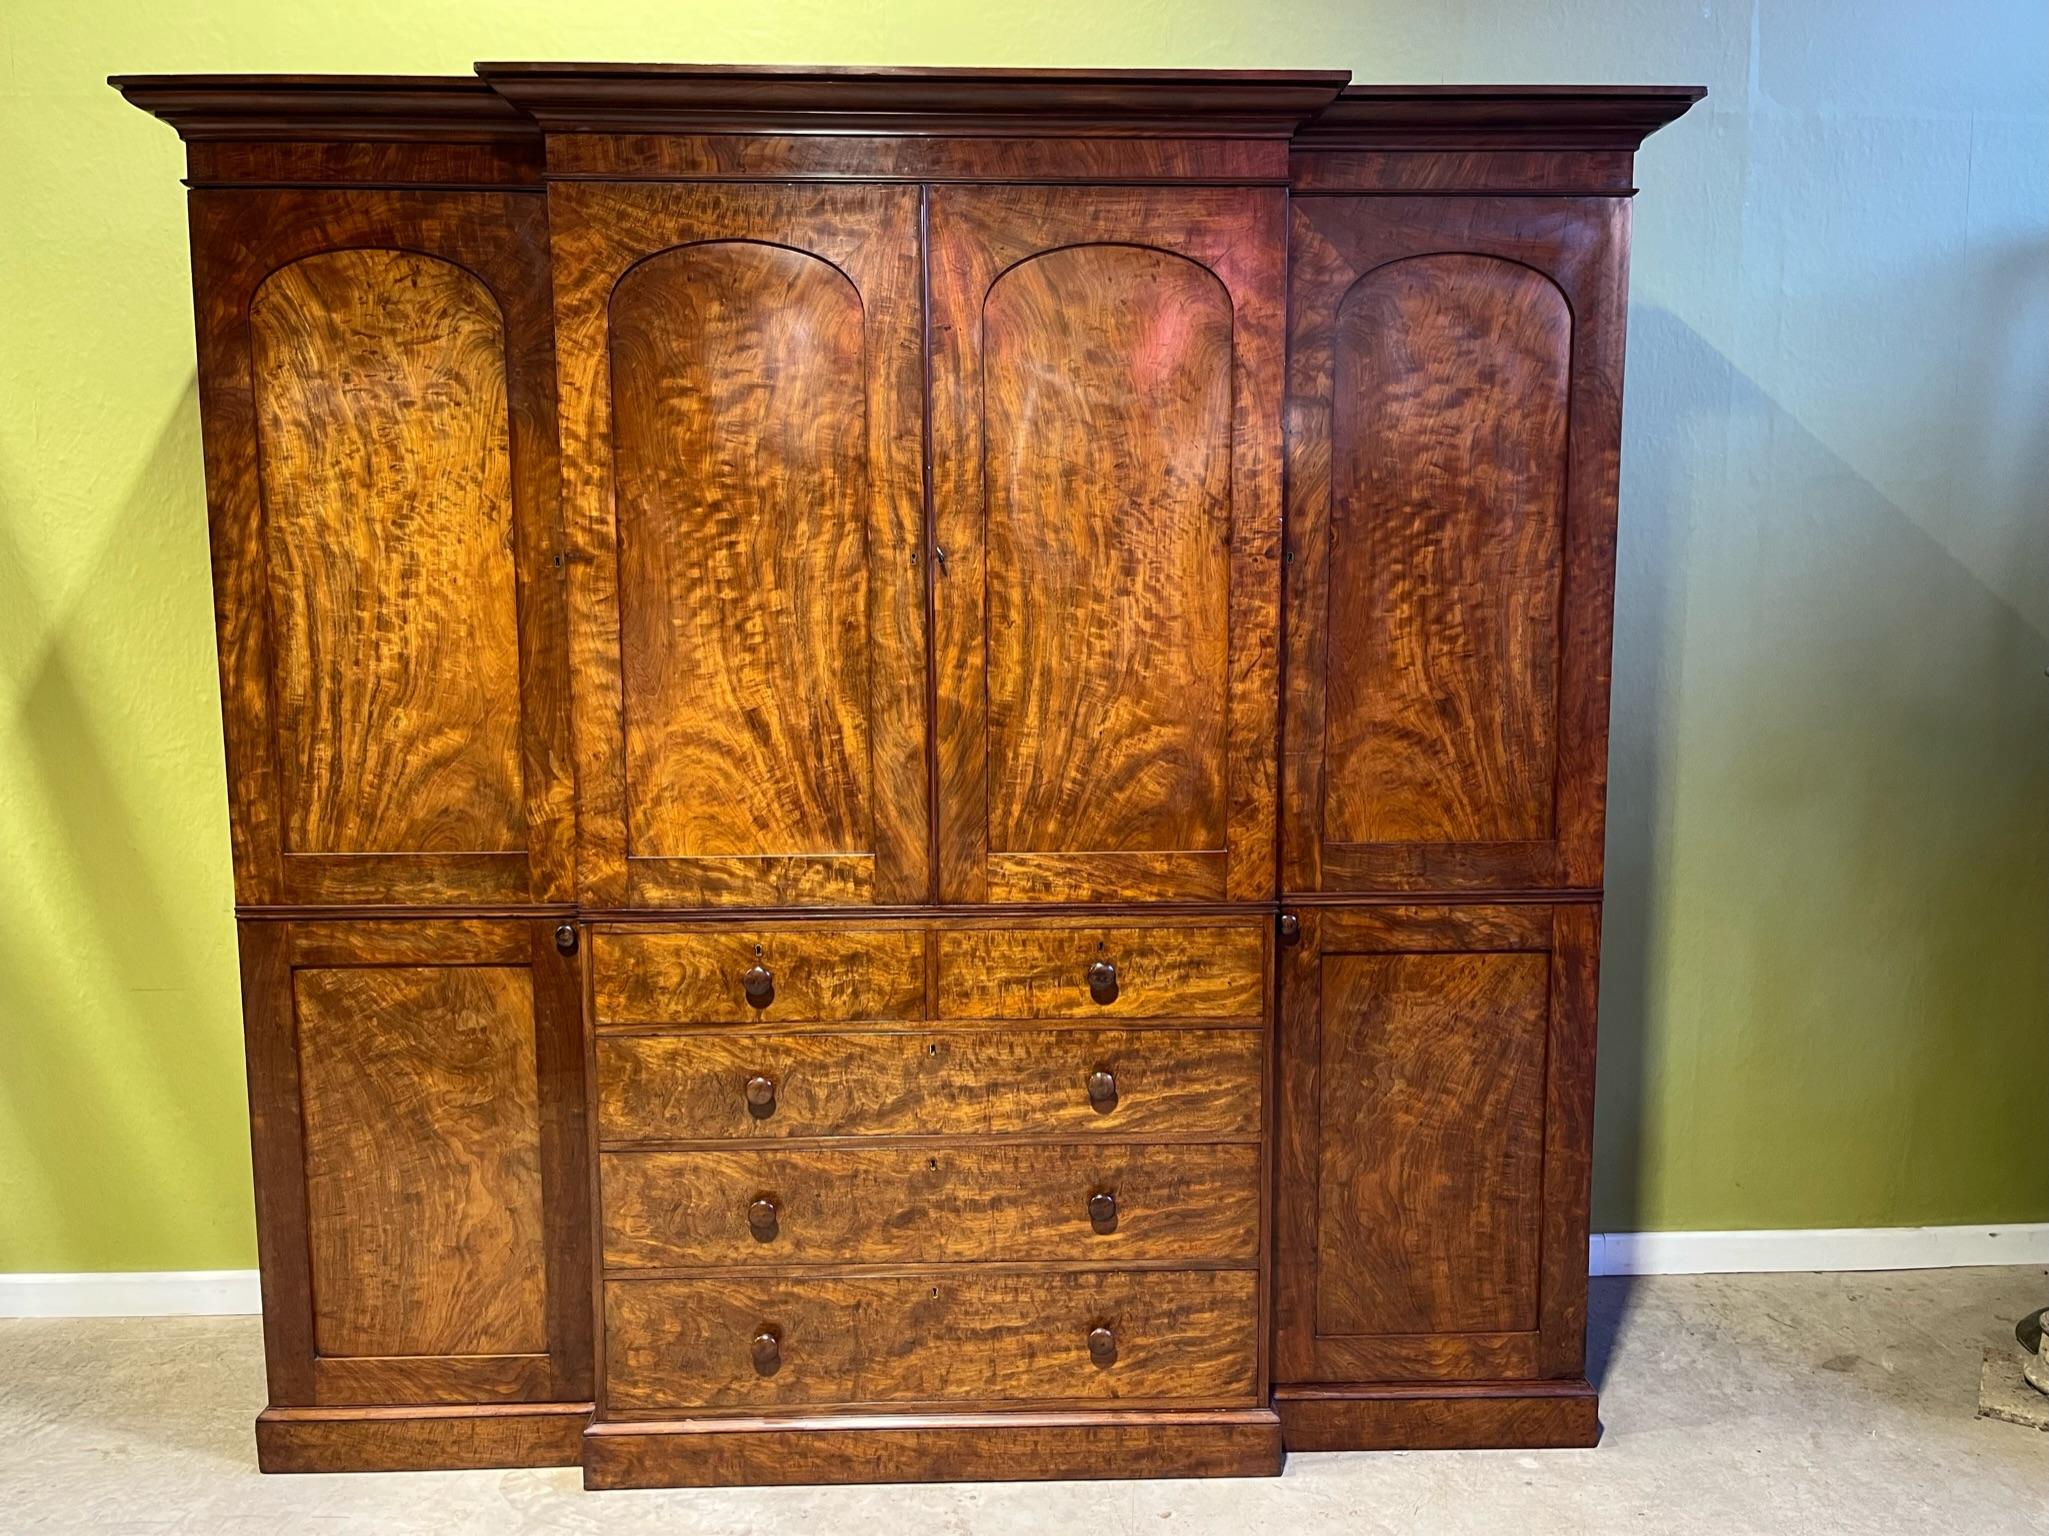 A 19th century flamed mahogany country house breakfront wardrobe, the linen press centre flanked by two sentry boxes with hanging space, in lovely condition with wonderful flamed timbers.

99”1/2 wide x 27”1/4 deep x 93”1/2 high